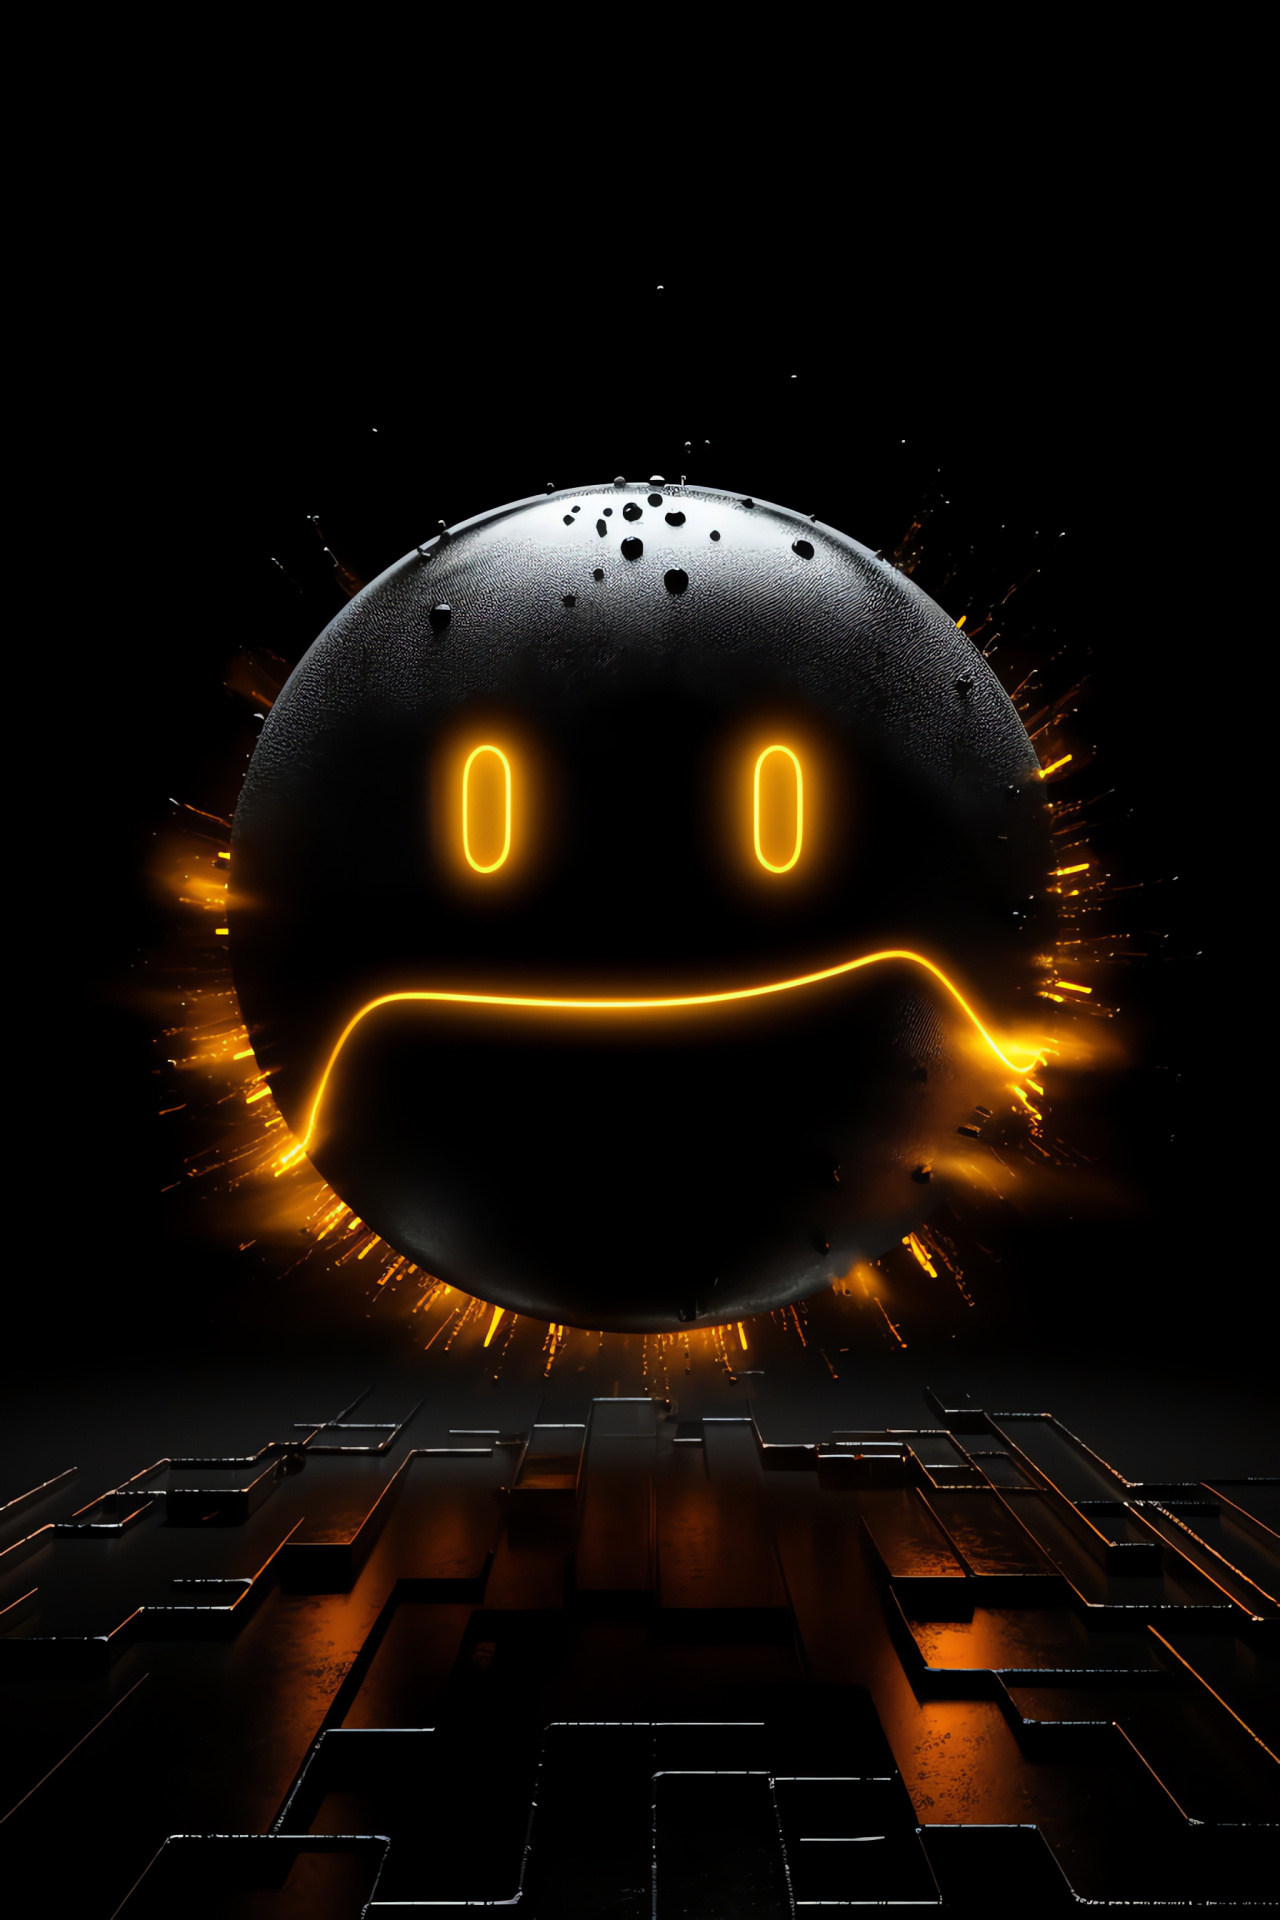 Iconic Pacman figure, Pellet-gobbling game, Ghost-fleeing challenge, Arcade classic sprite, Yellow sphere protagonist, HD Phone Wallpaper